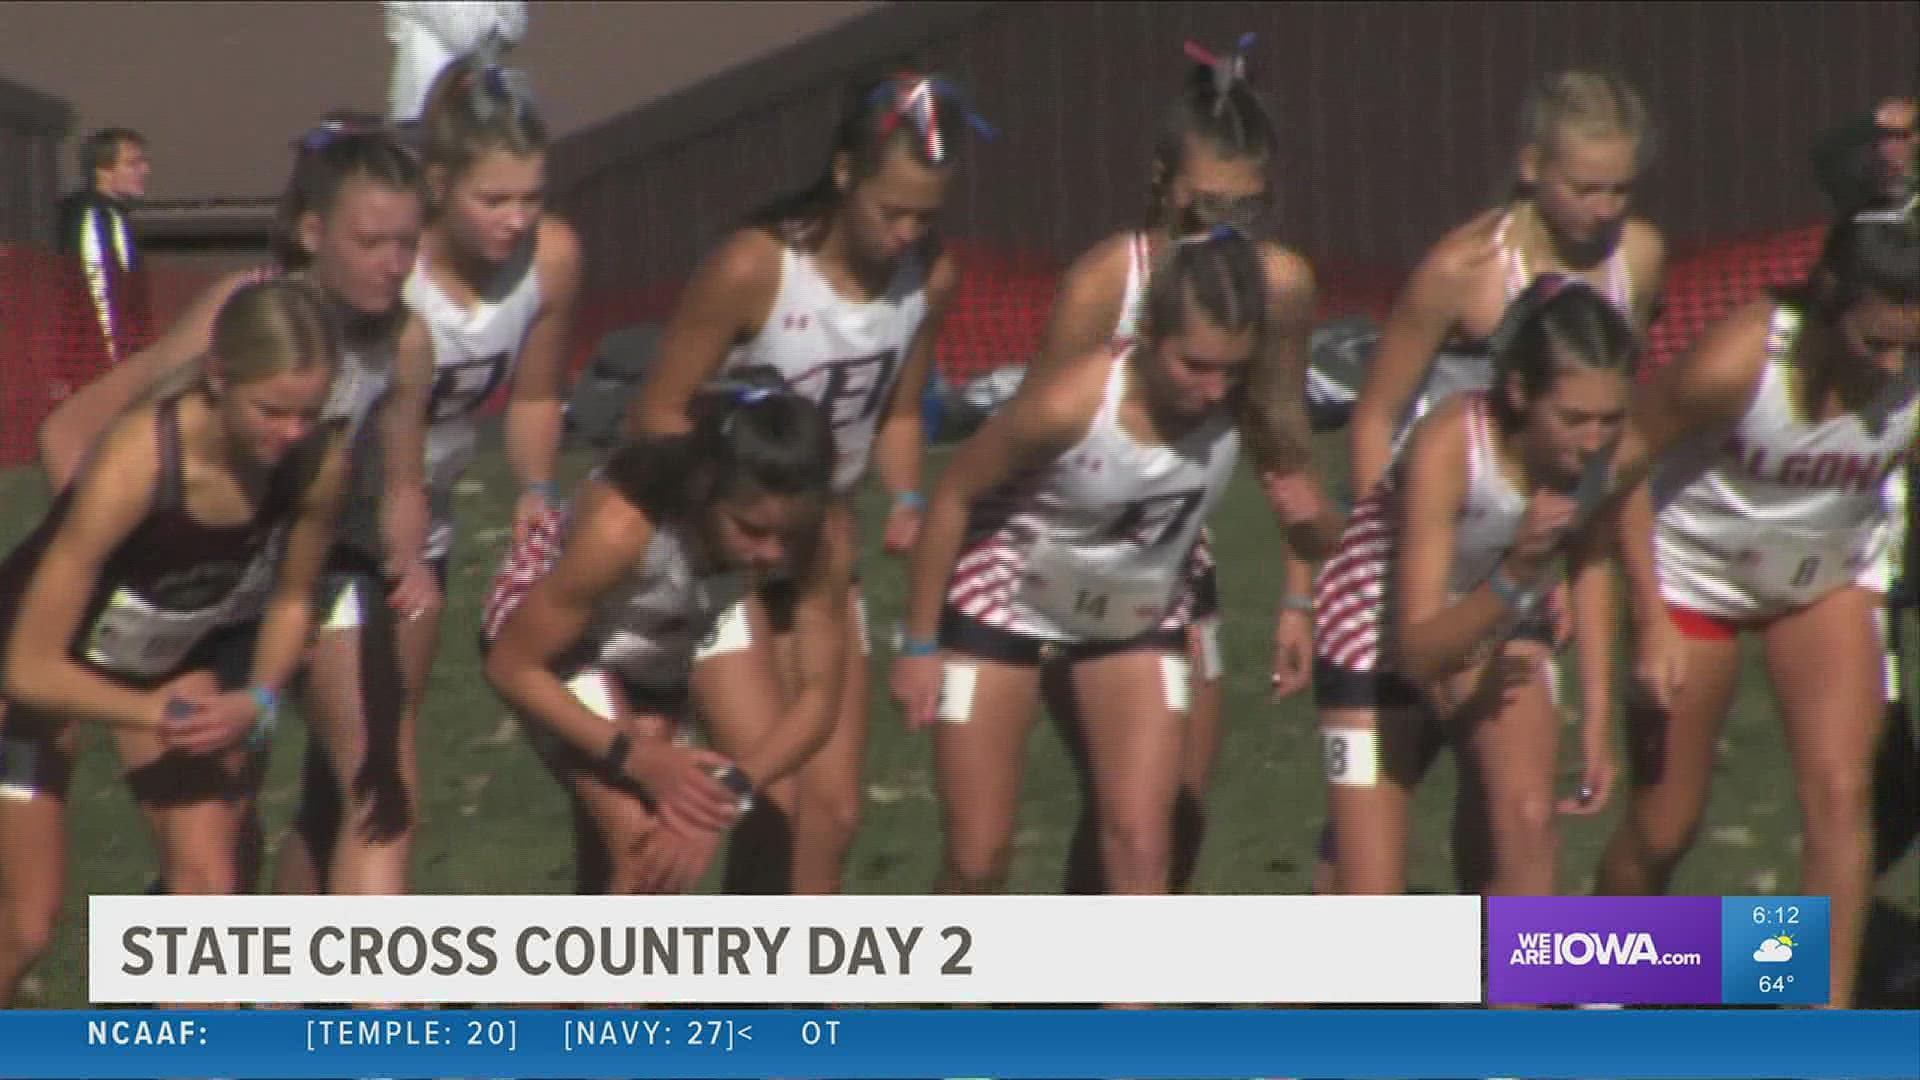 It's day two of state cross county in Fort Dodge. Hear from some of the competitors as the competition continues.